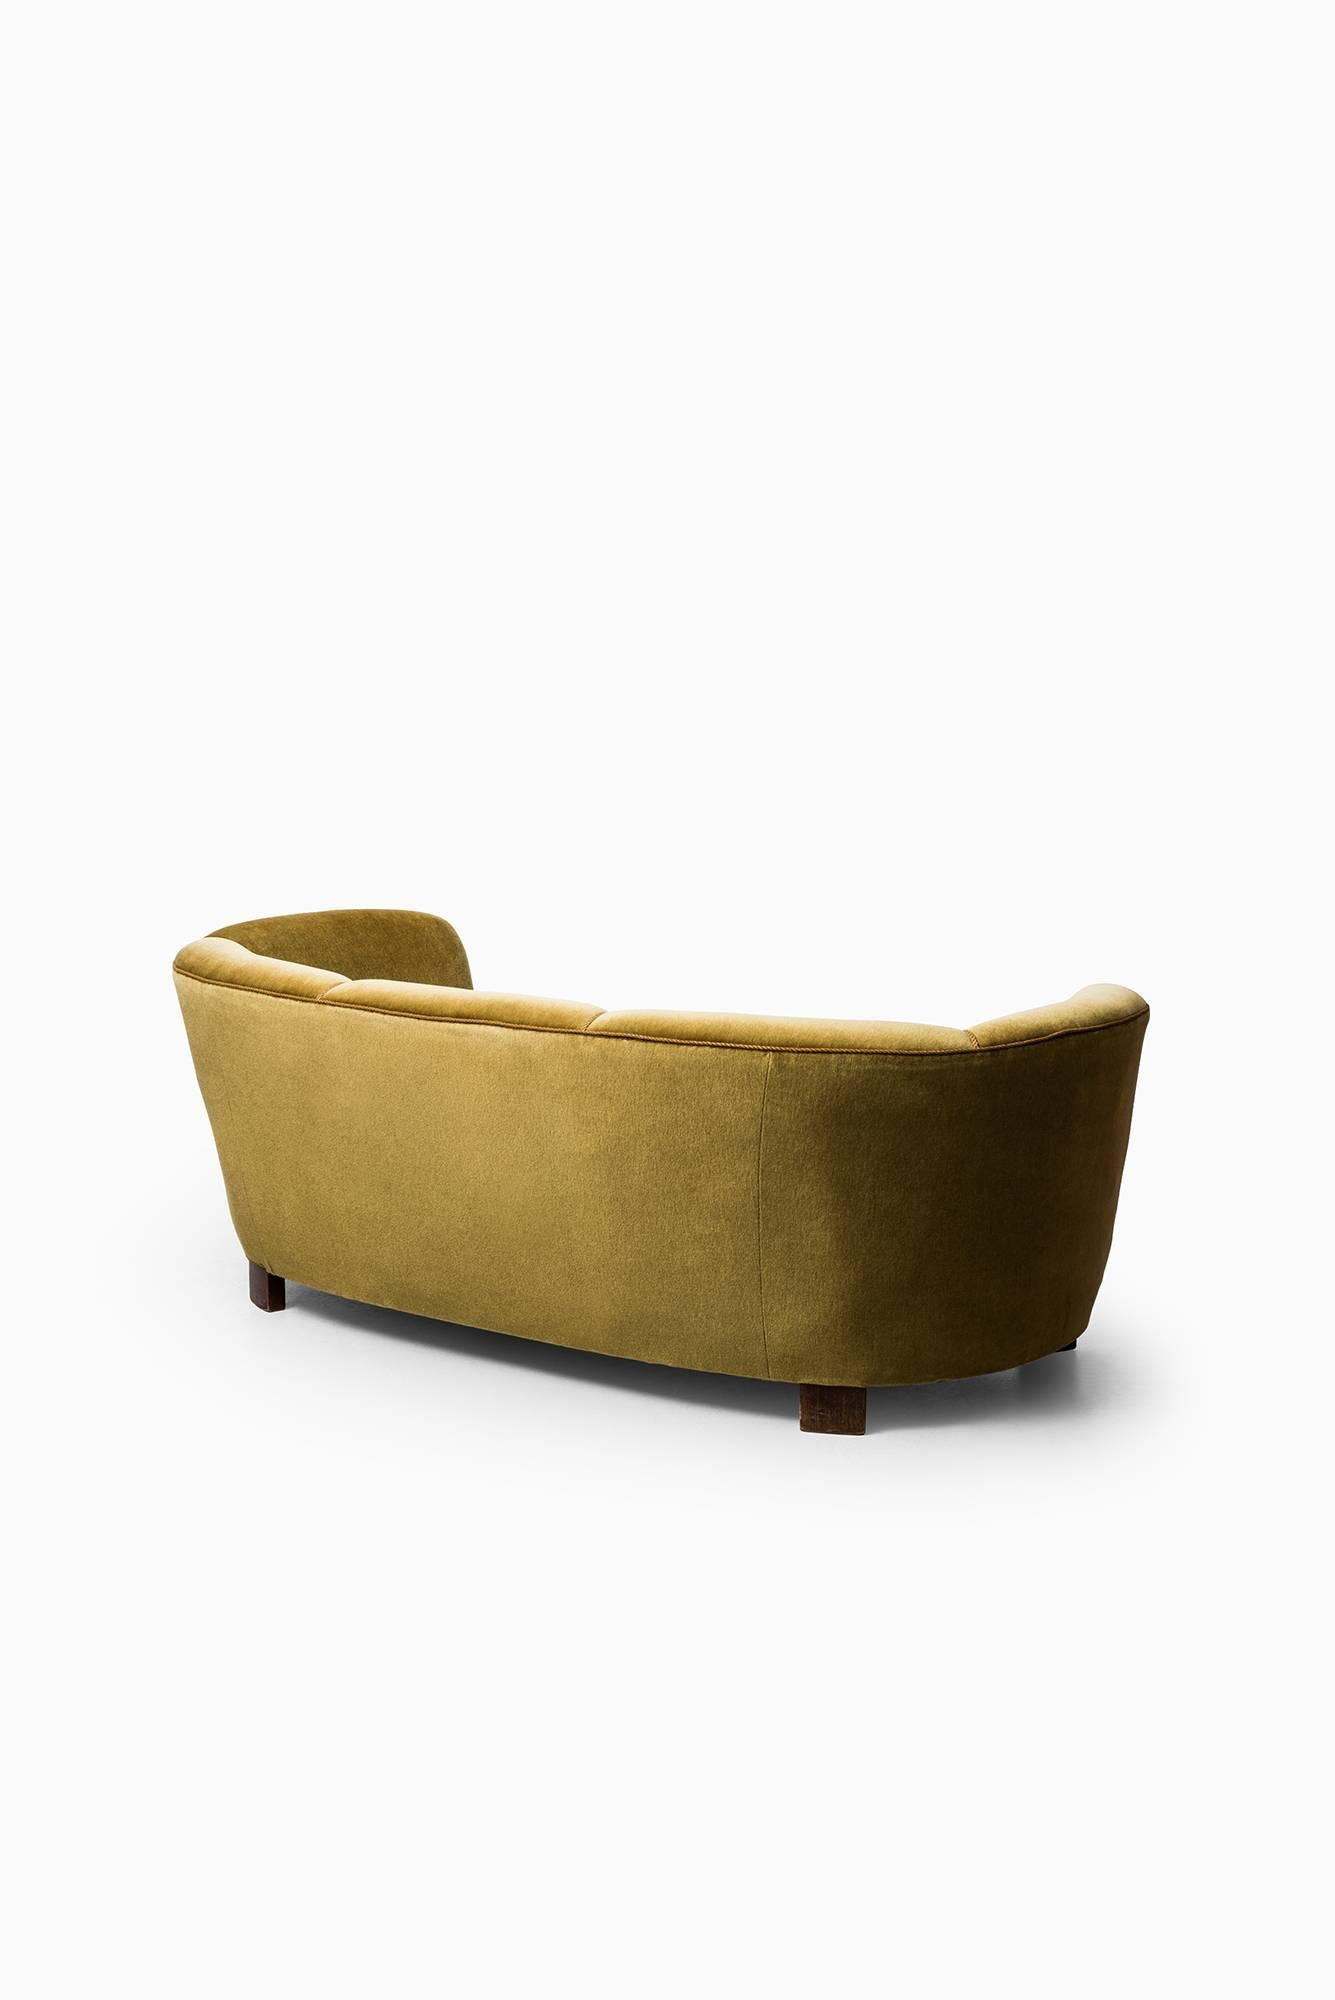 Mid-20th Century Large Curved Sofa in Green / Yellow Velvet Produced in Denmark